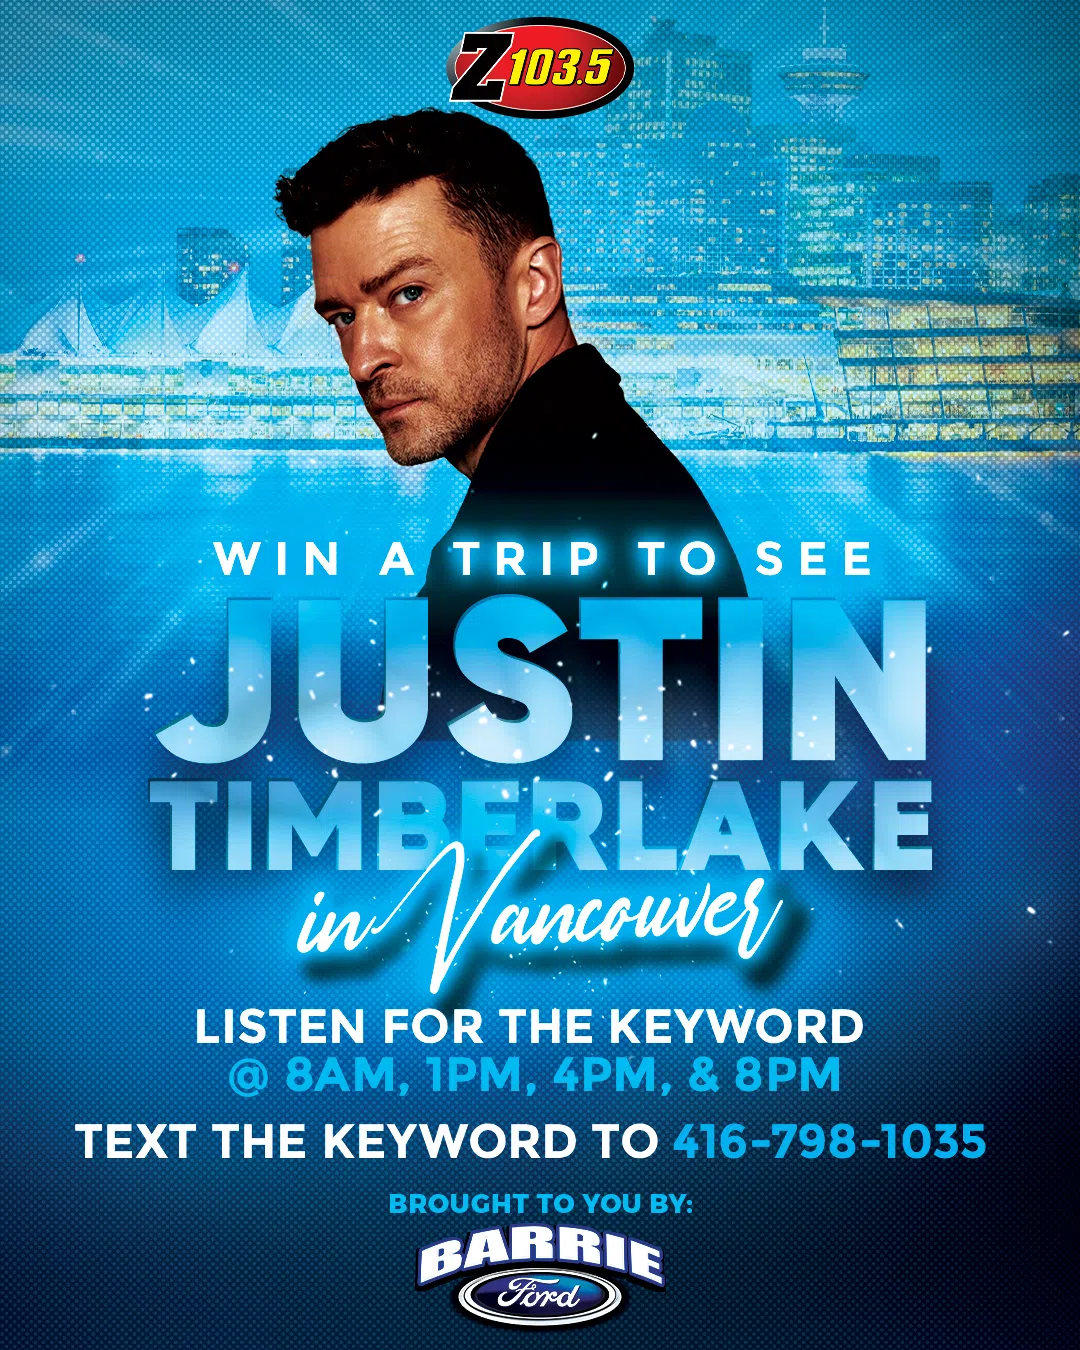 Feature: https://z1035.com/win/win-to-see-justin-timberlake-in-vancouver/